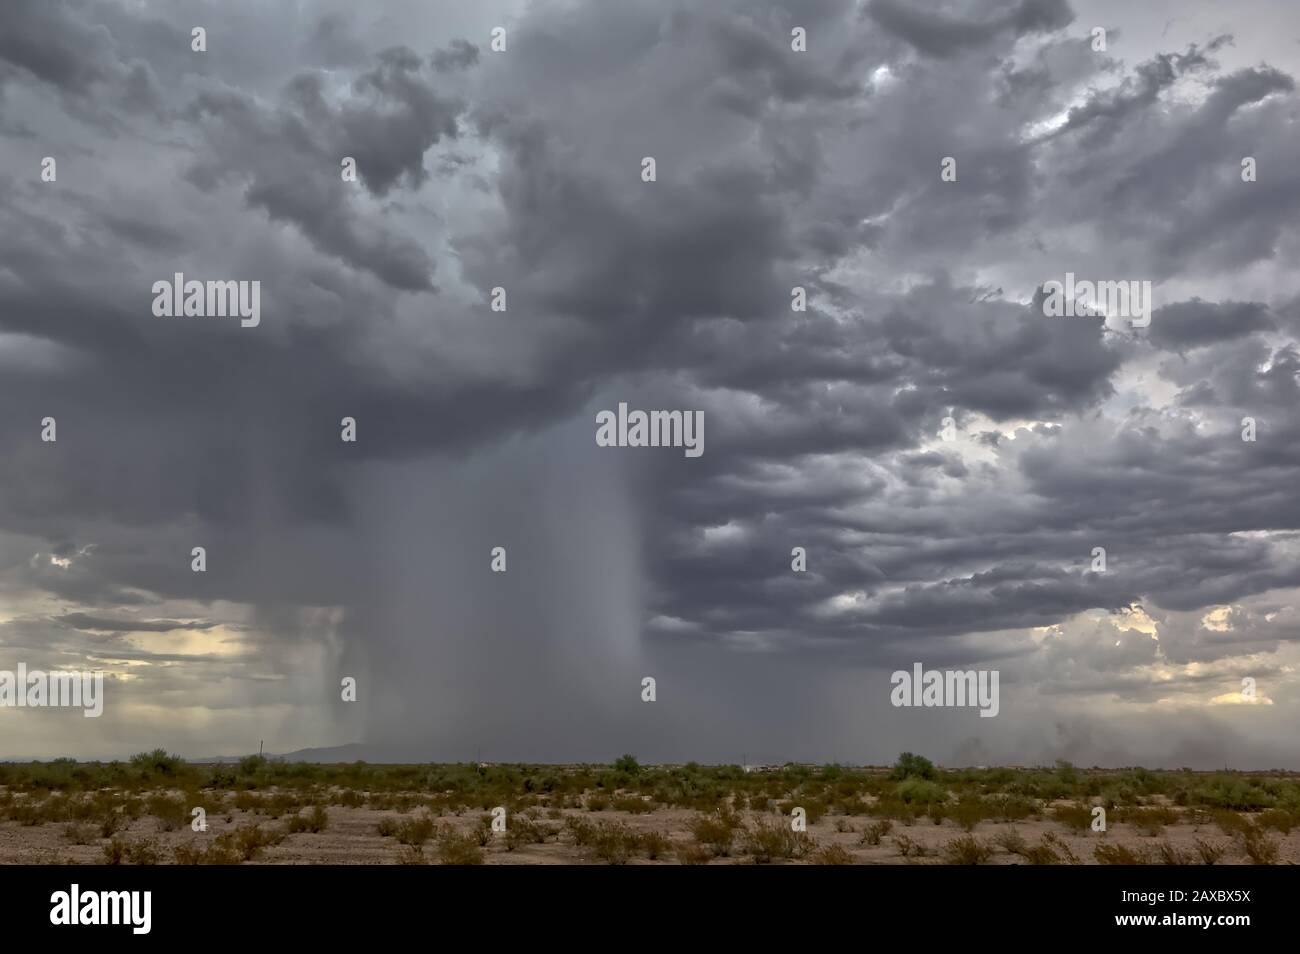 A monstrous monsoon storm letting loose a downpour of heavy rain which completely engulfs the White Tank Mountains in southwestern Arizona during the Stock Photo